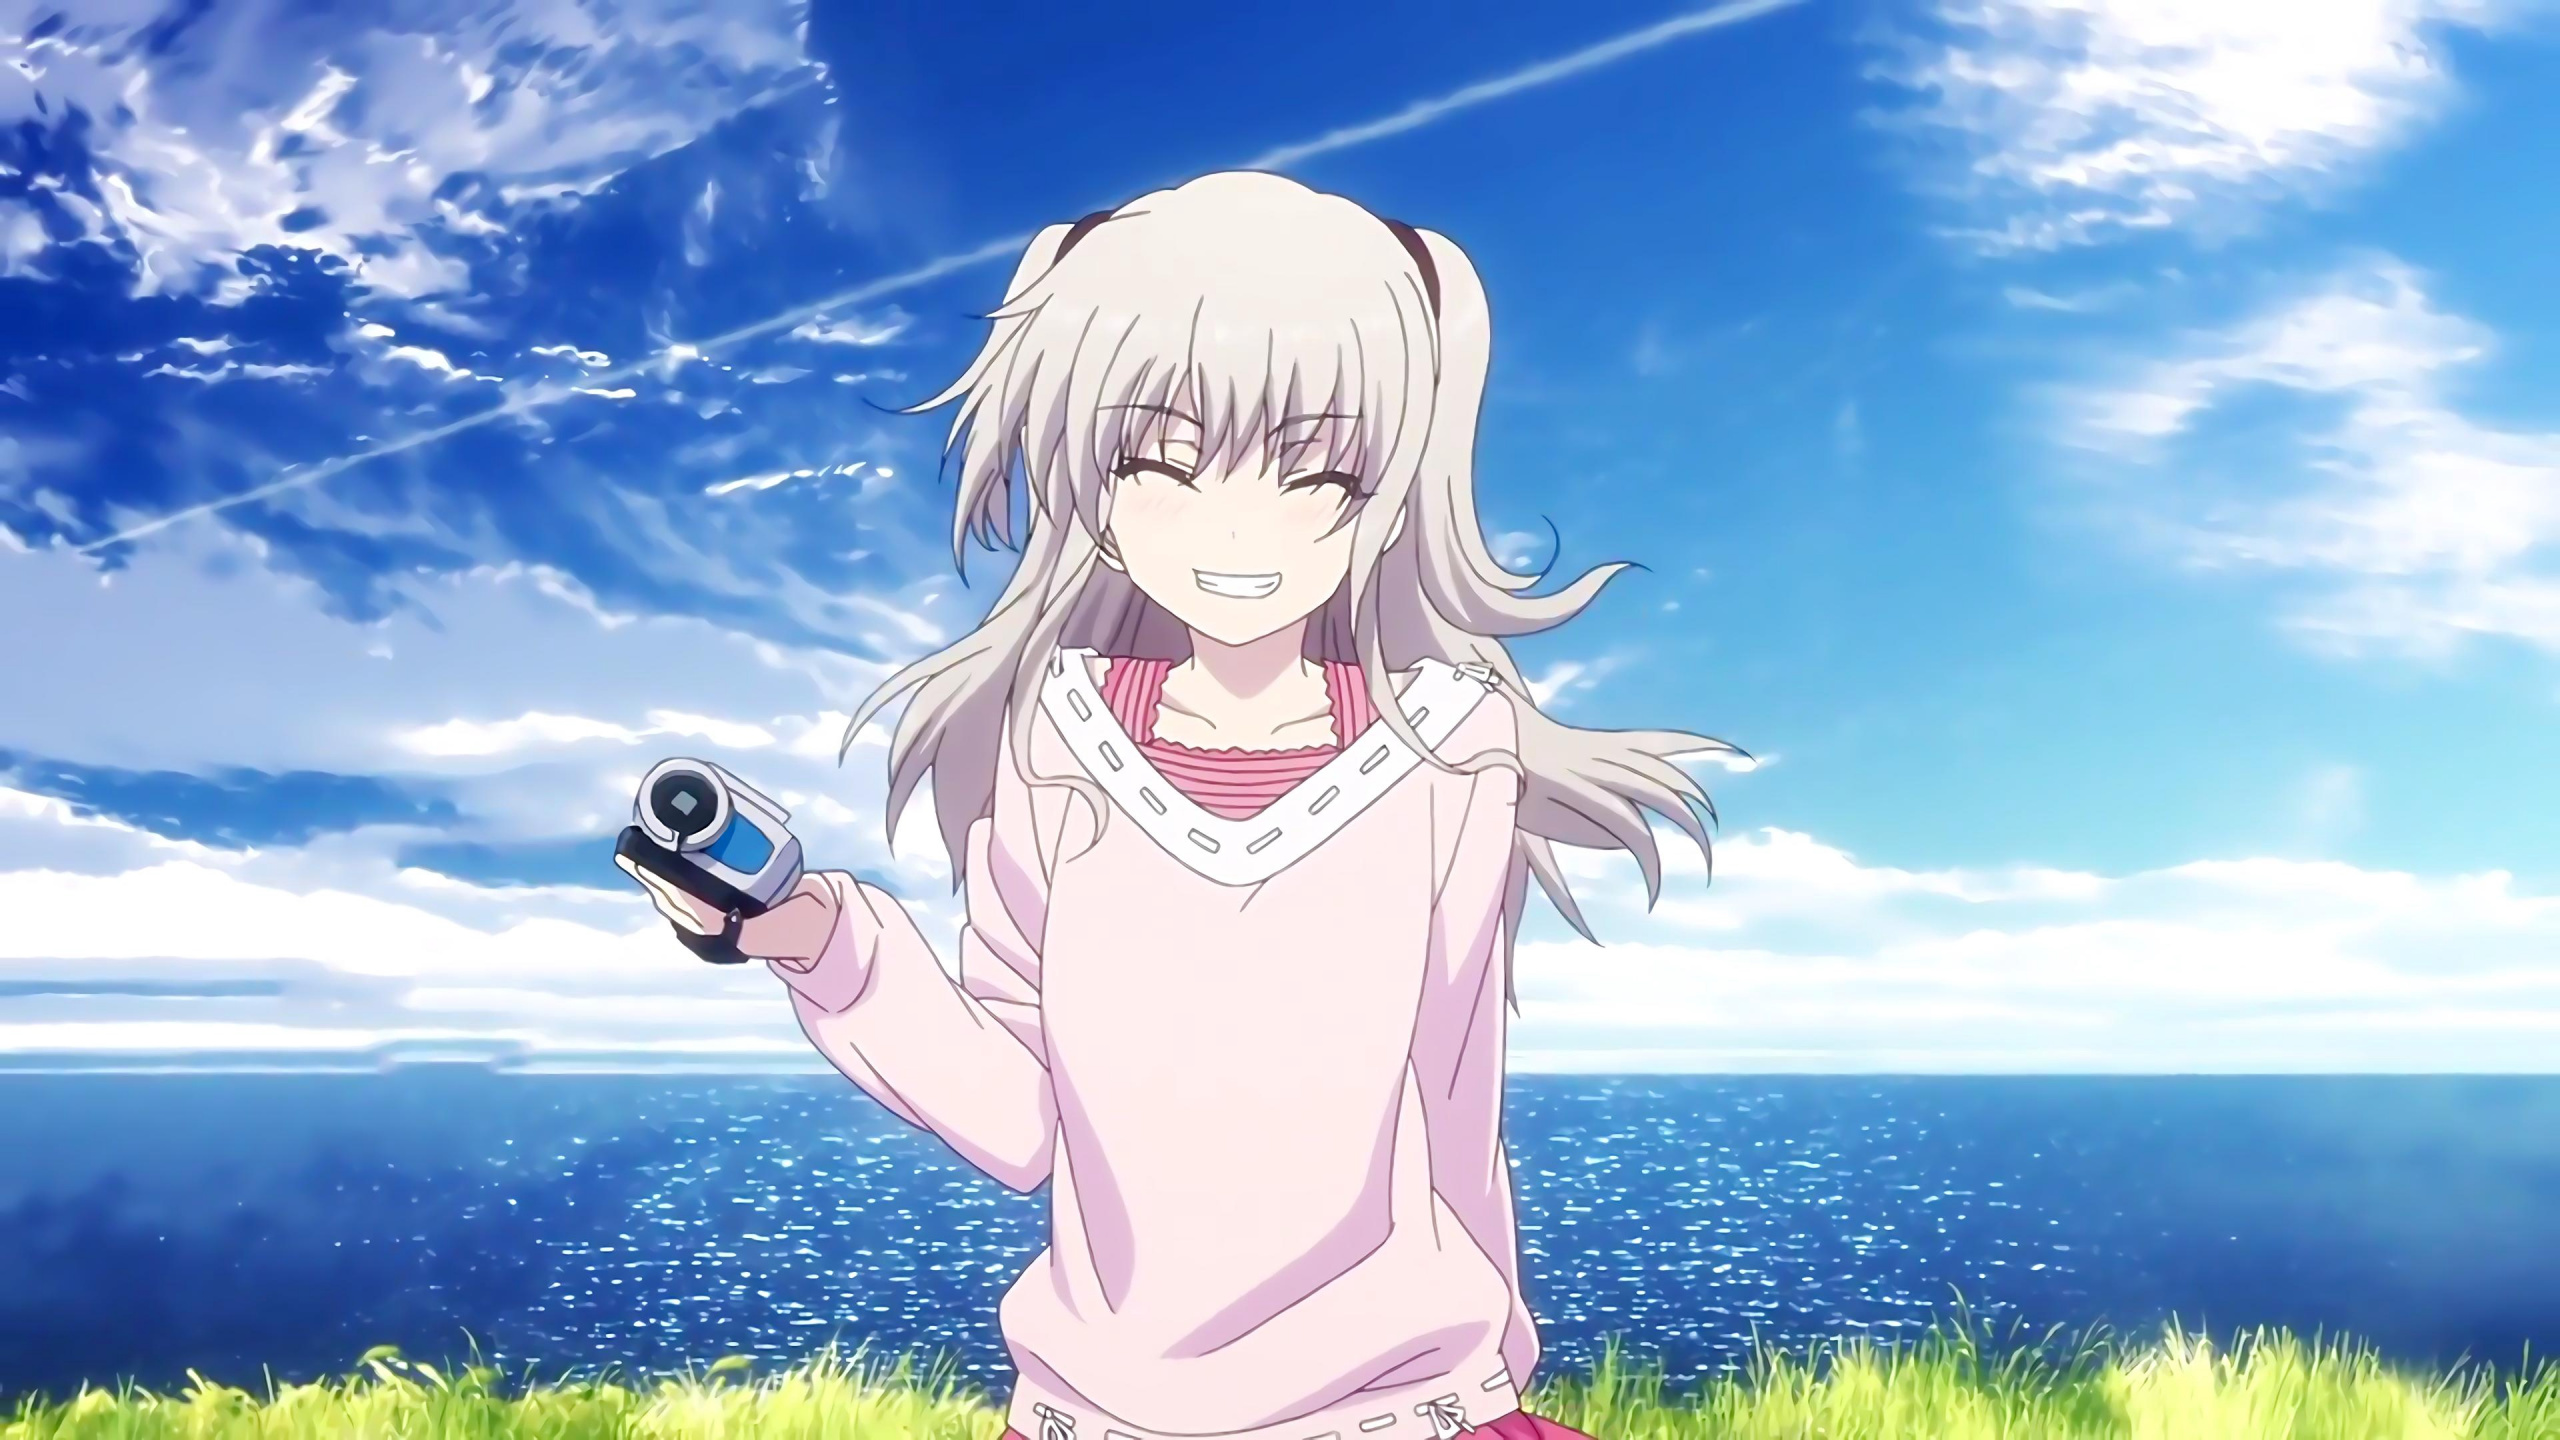 Girl in Pink Long Sleeve Shirt Holding Black and Silver Microphone Anime Character. Wallpaper in 2560x1440 Resolution